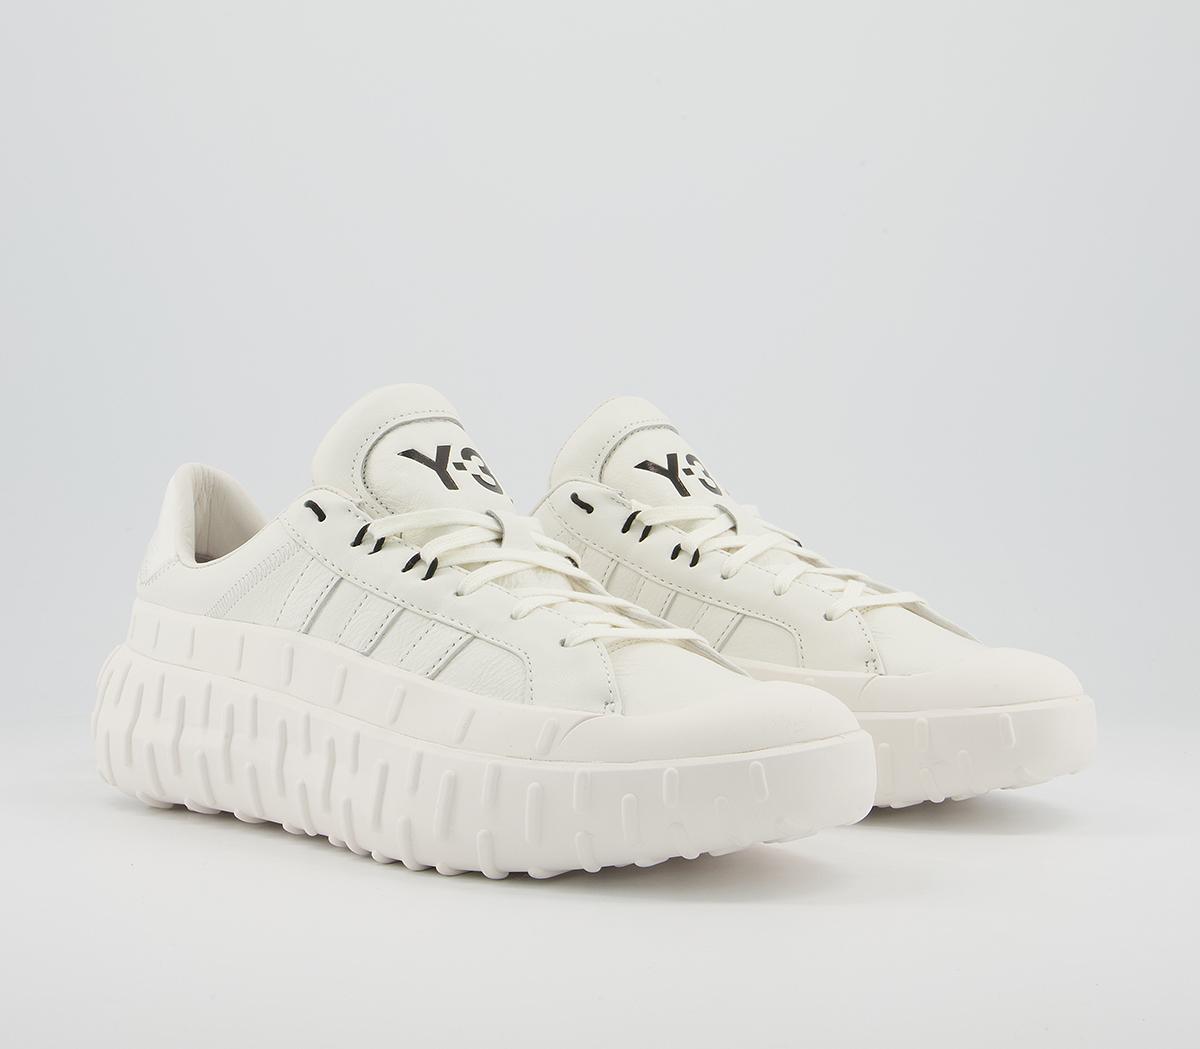 adidas Y-3 Y-3 Gr.1p Low Trainers Core White Off White - Women's ...